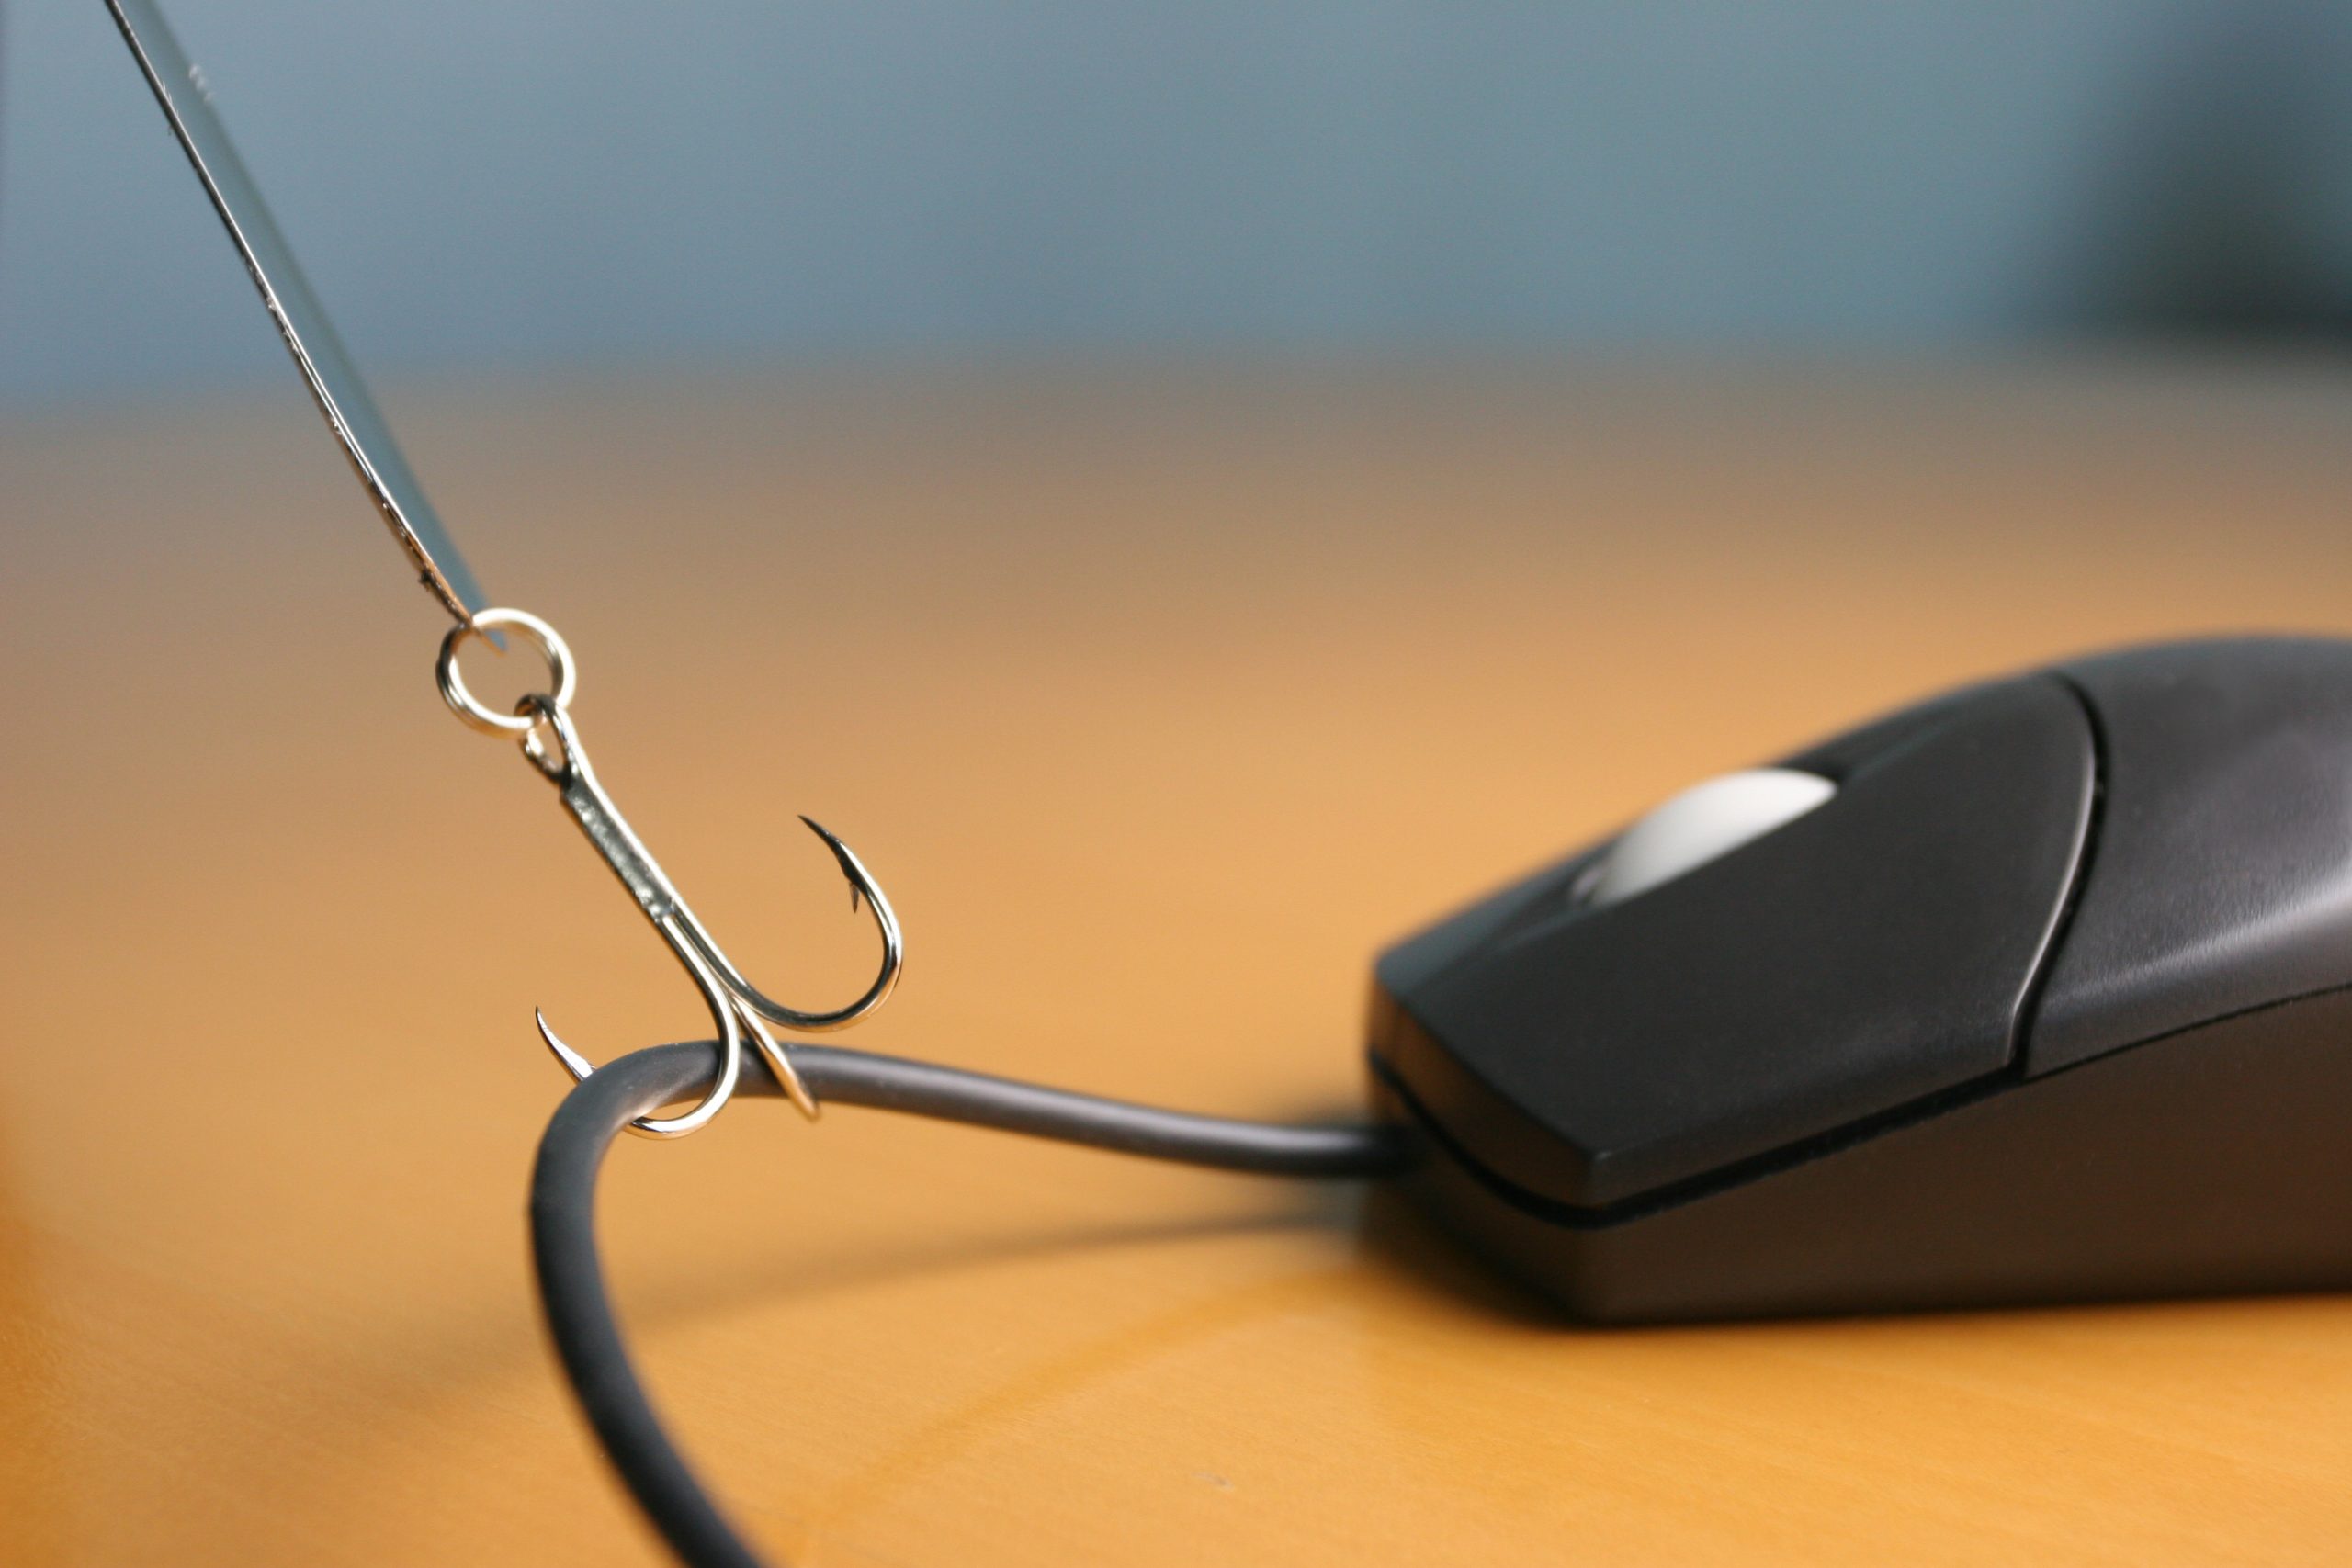 Close up of a fishing hook snagging a computer mouse cord on a desktop.